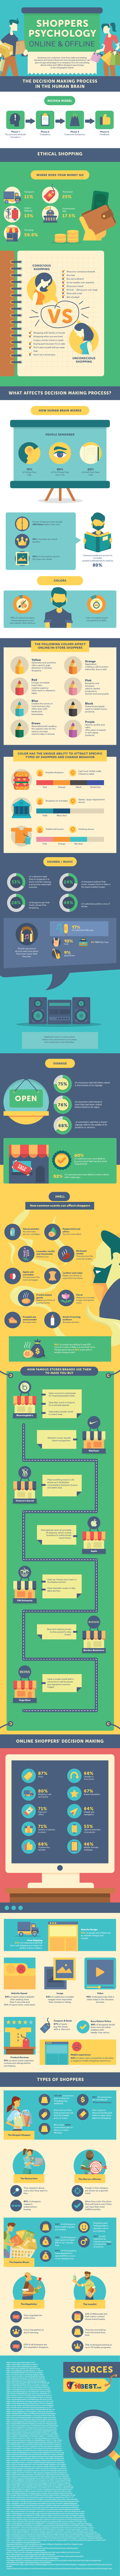 shoppers-psychology-infographic